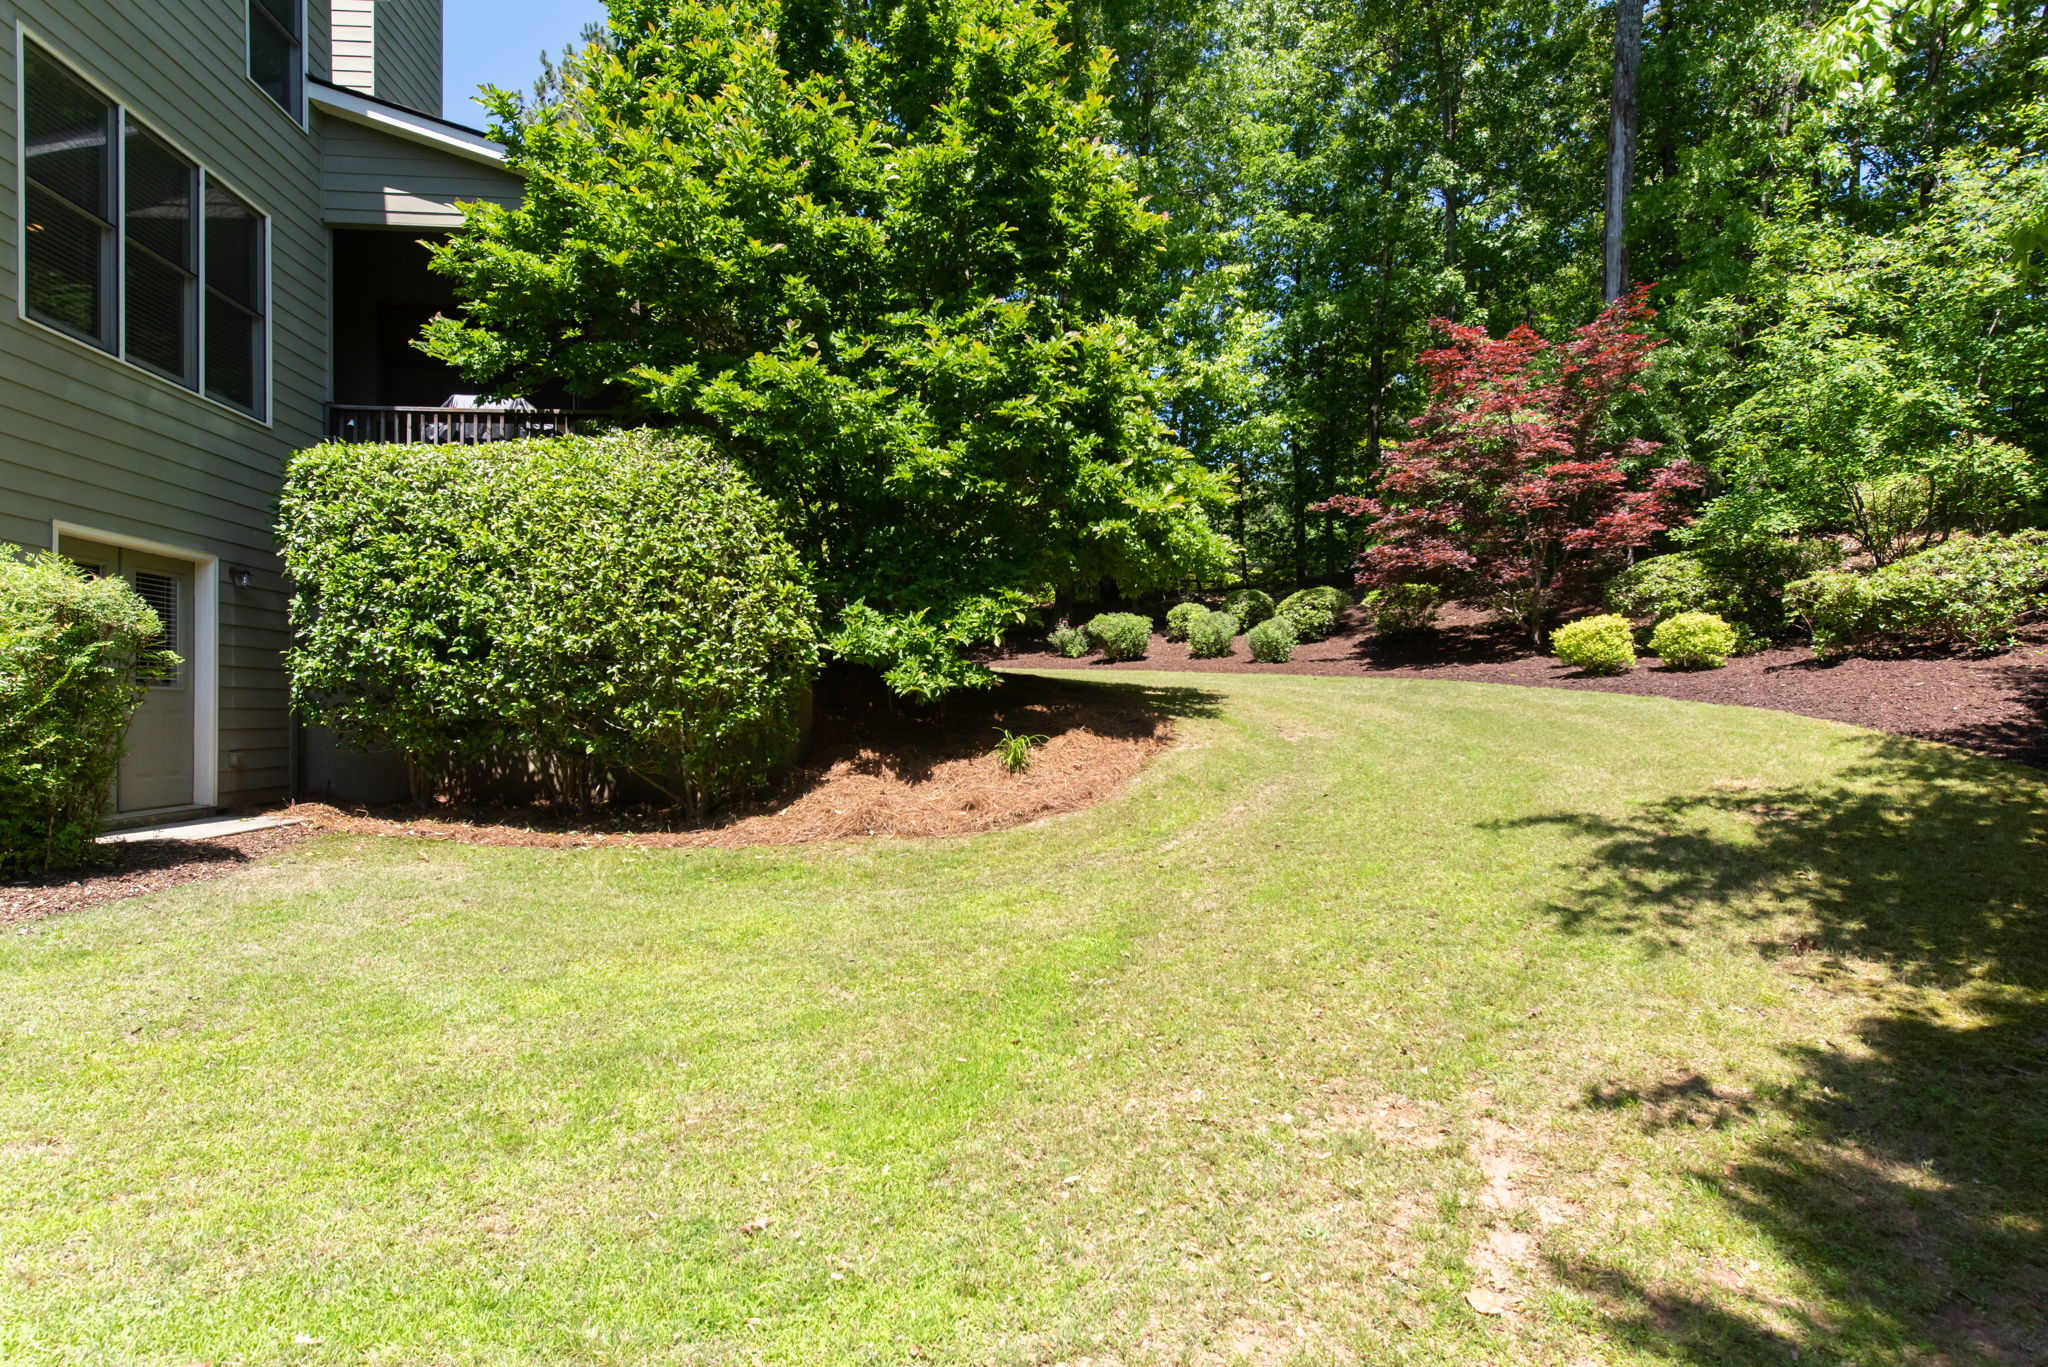  118 Holly Reserve Pkwy, Canton, GA 30114, US Photo 43